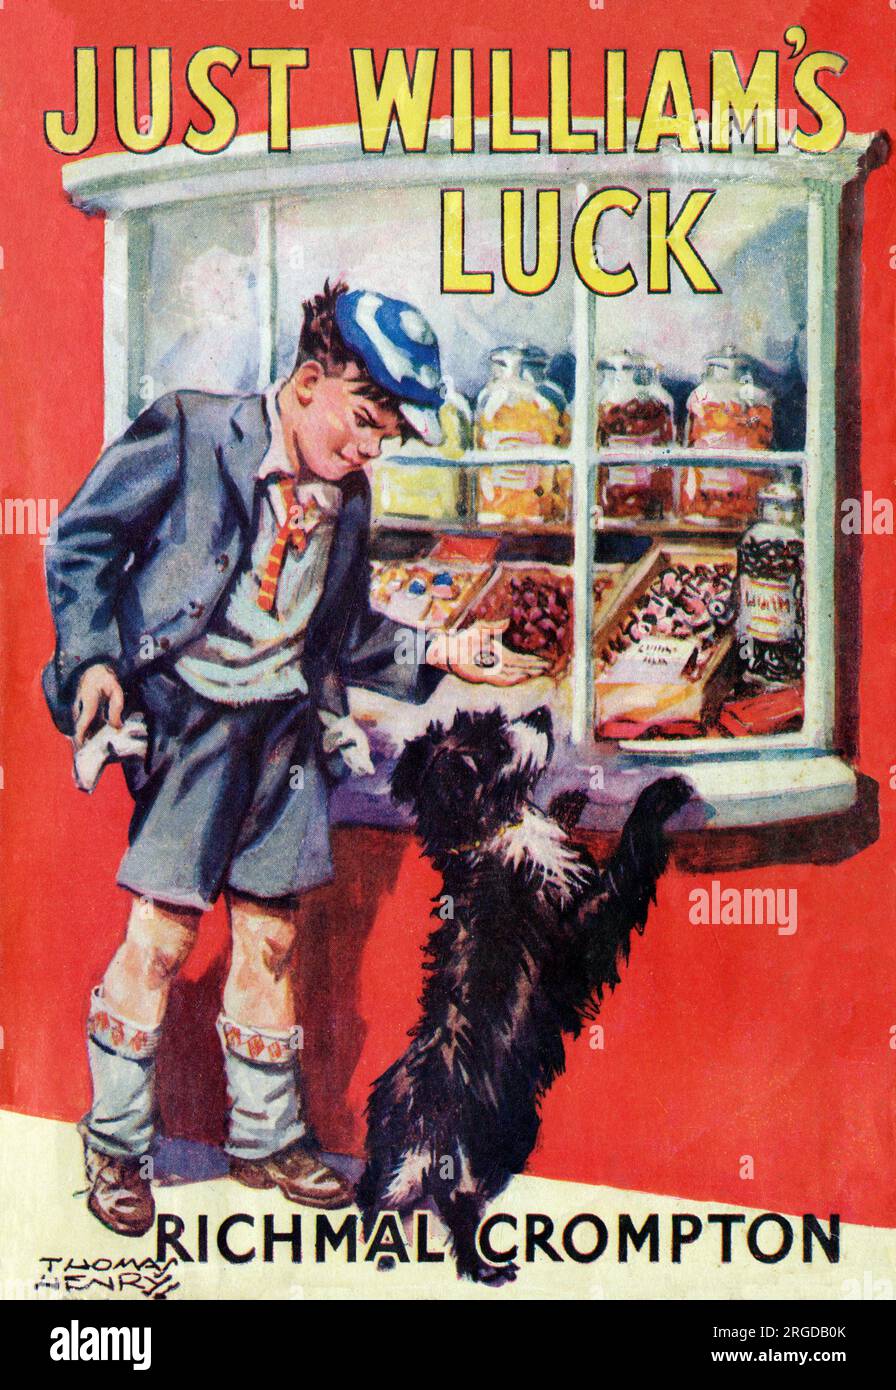 Just William's Luck by Richmal Crompton Stock Photo